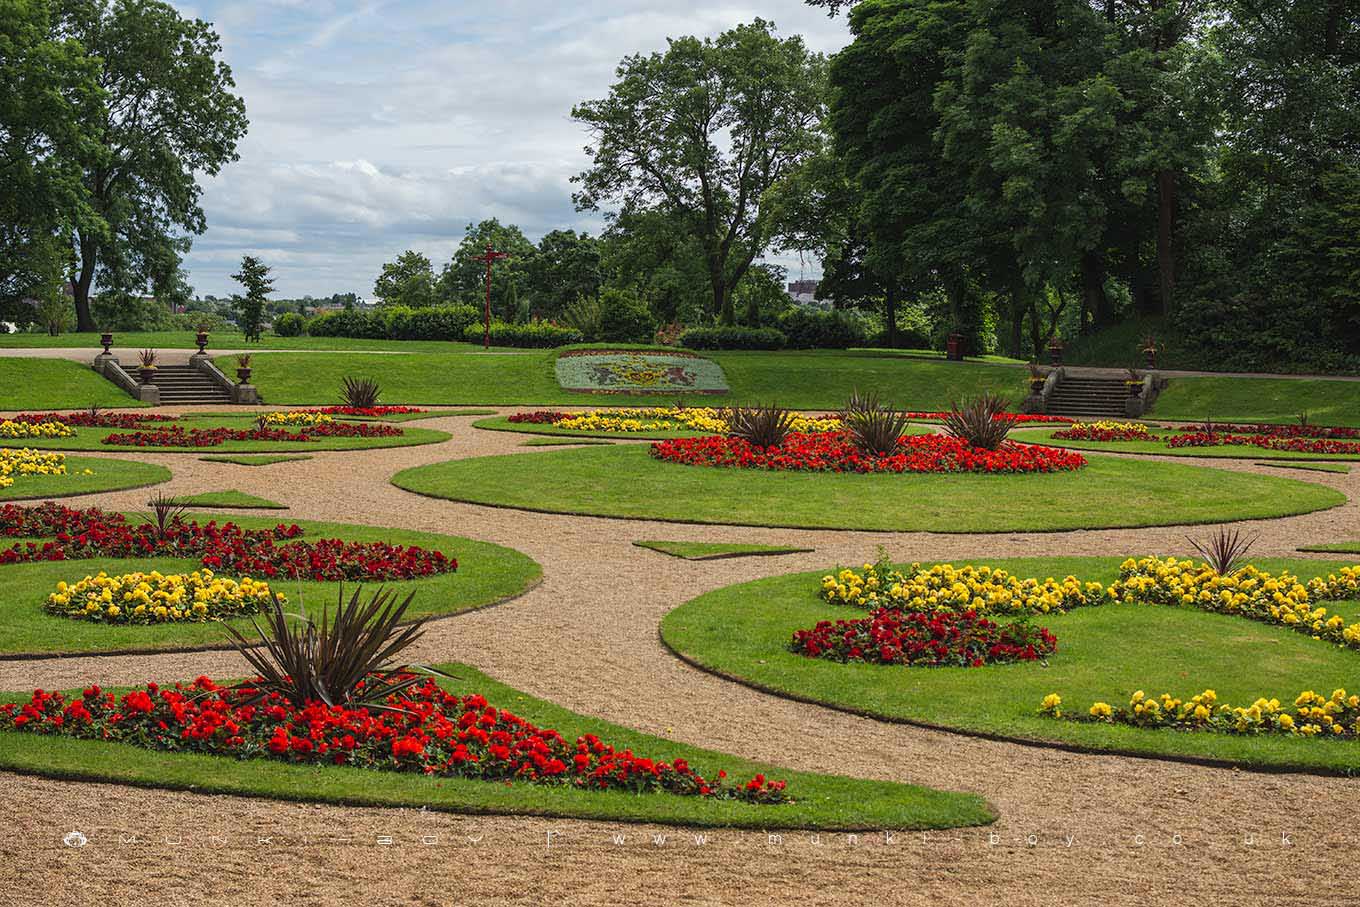 Parks in Greater Manchester